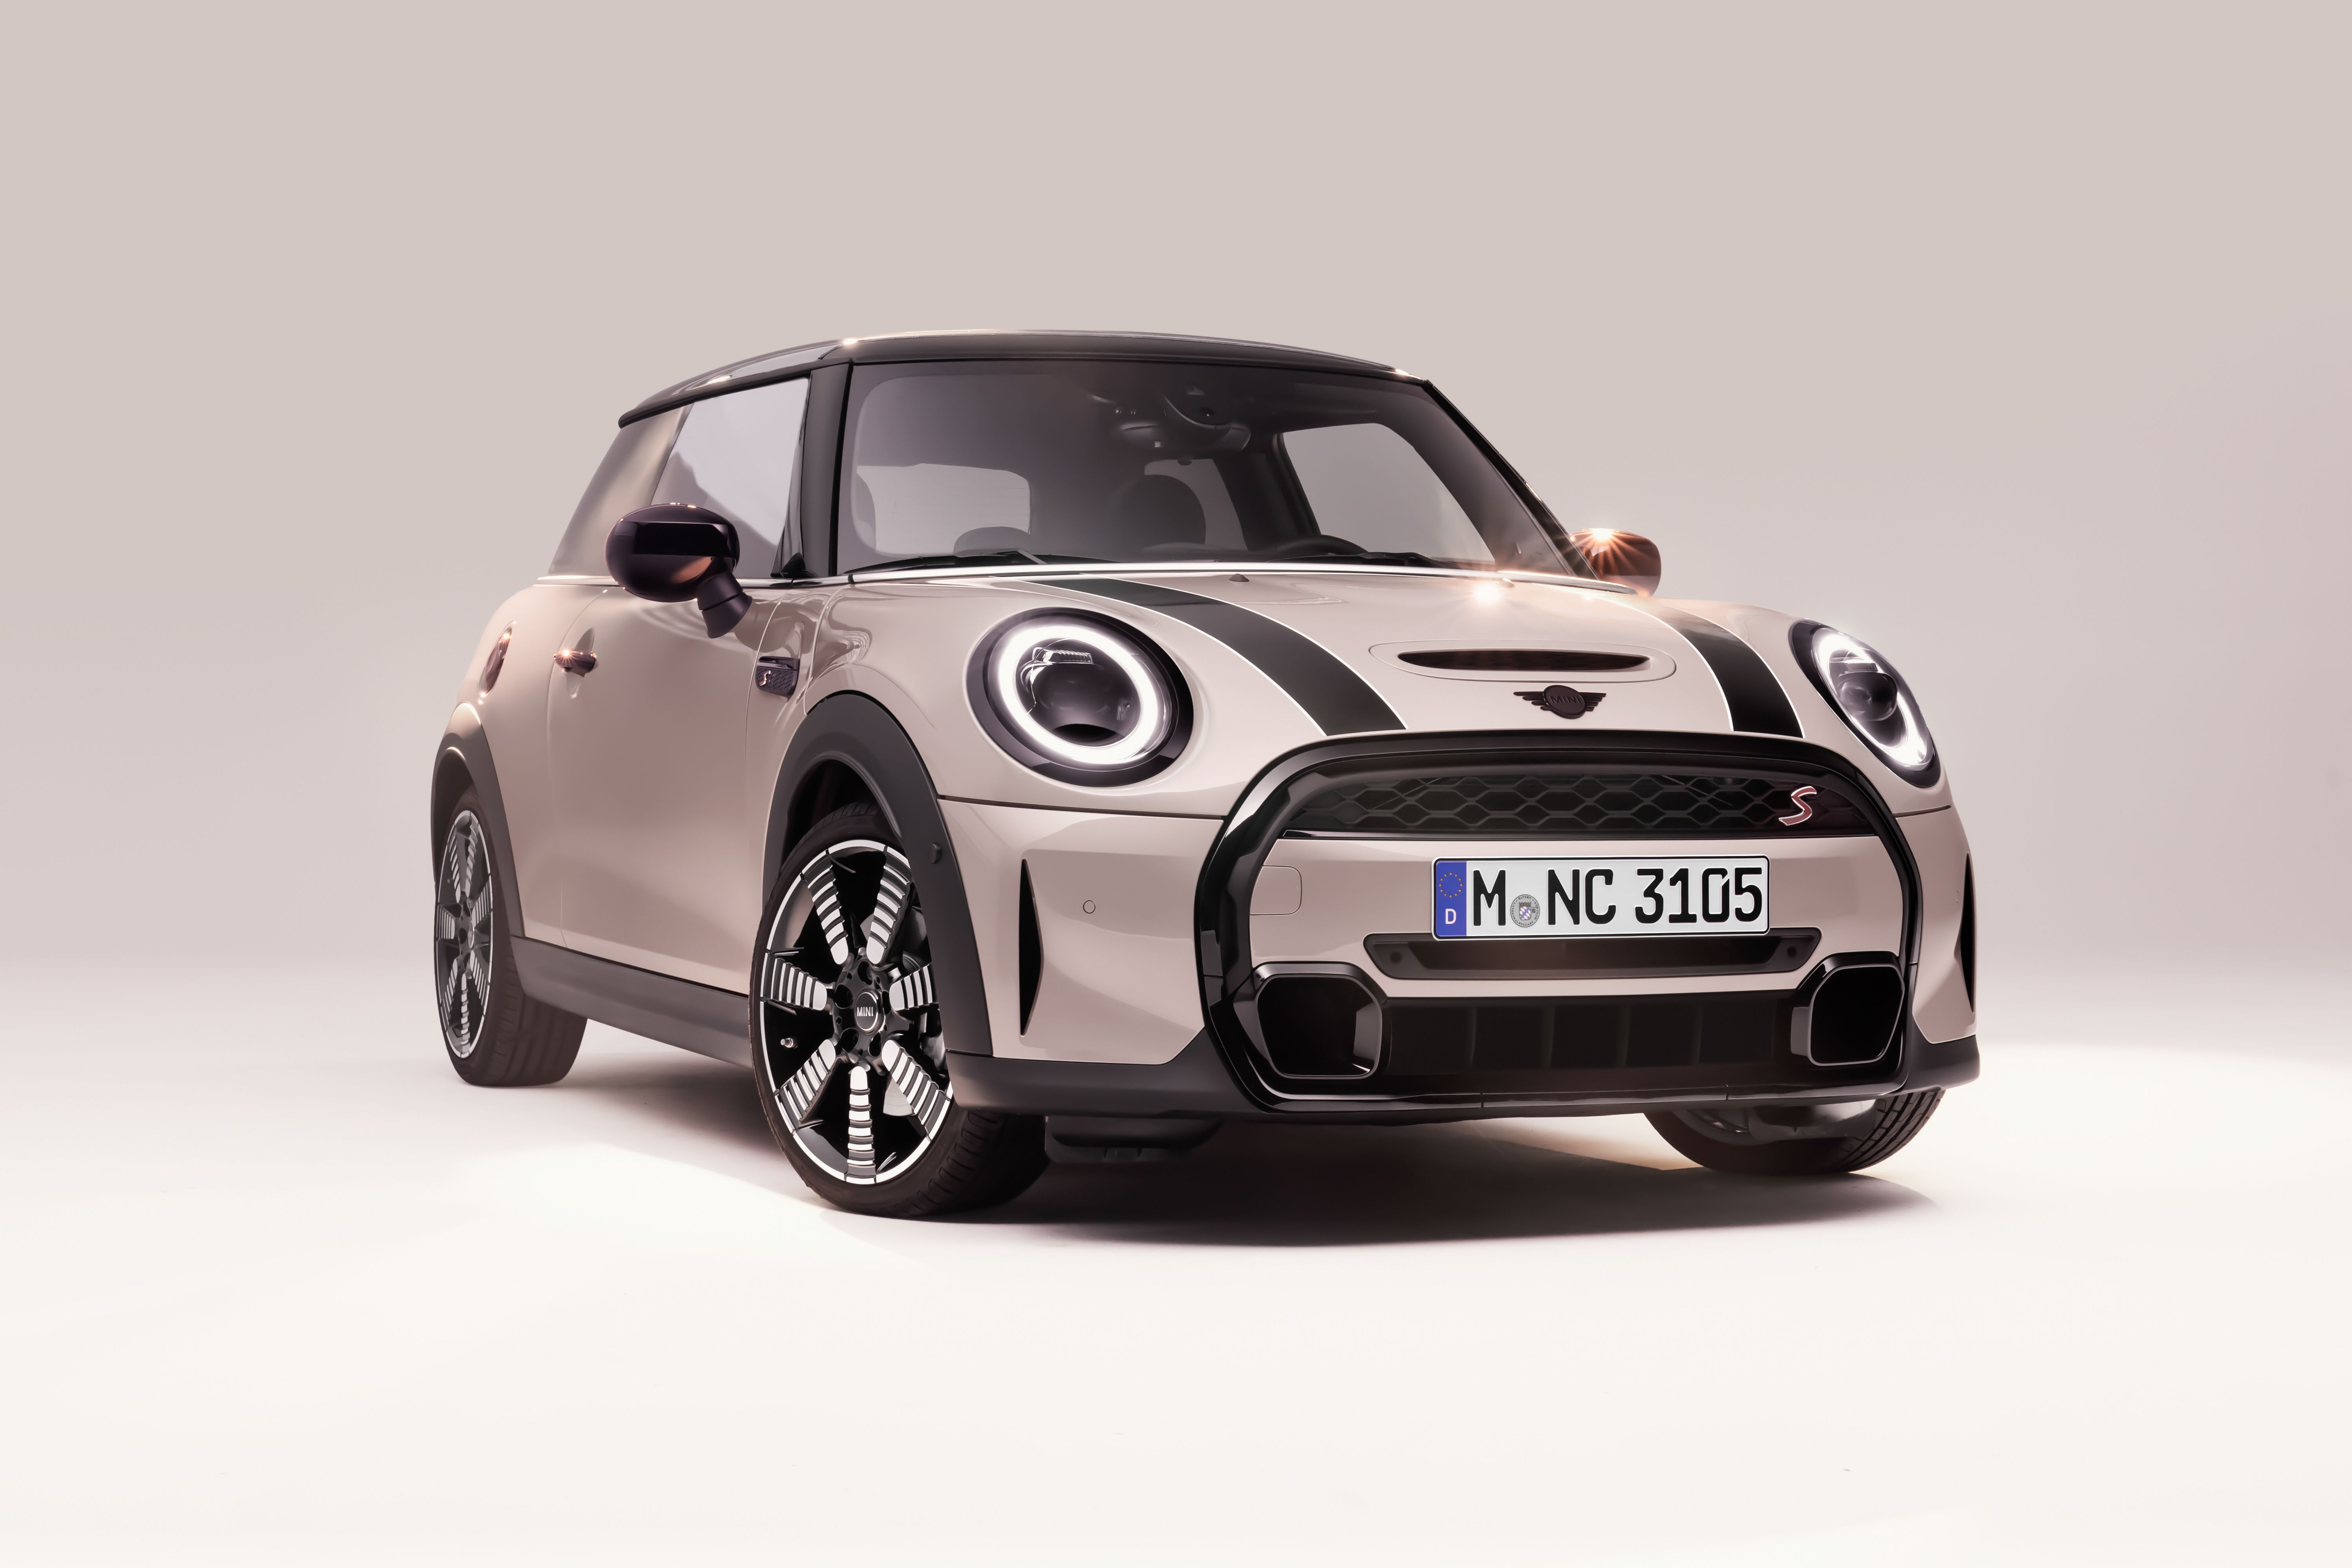 2015 MINI Cooper Hardtop Prices, Reviews, and Photos - MotorTrend